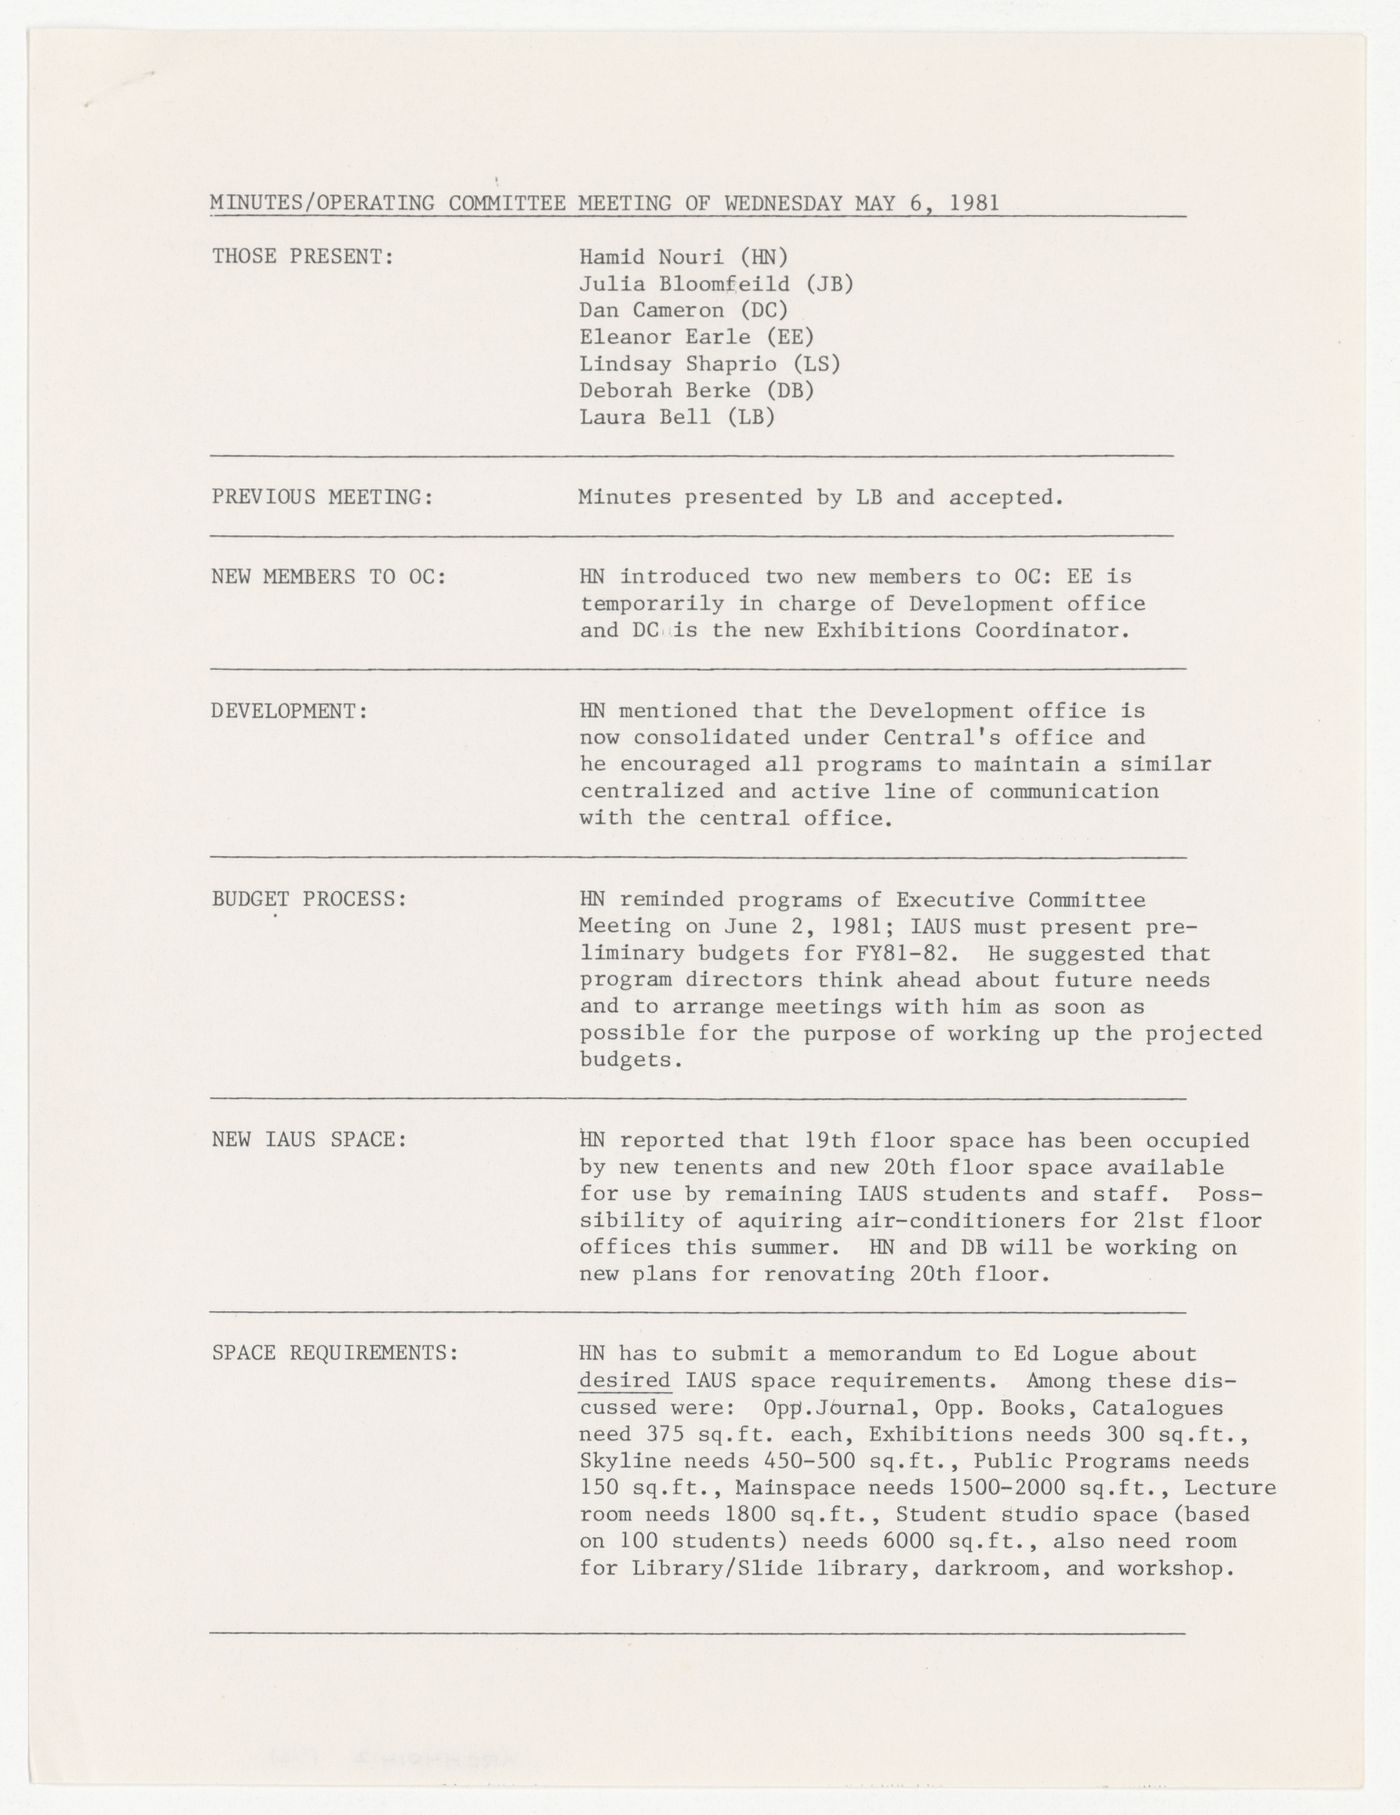 Minutes of meeting of the Operating Committee